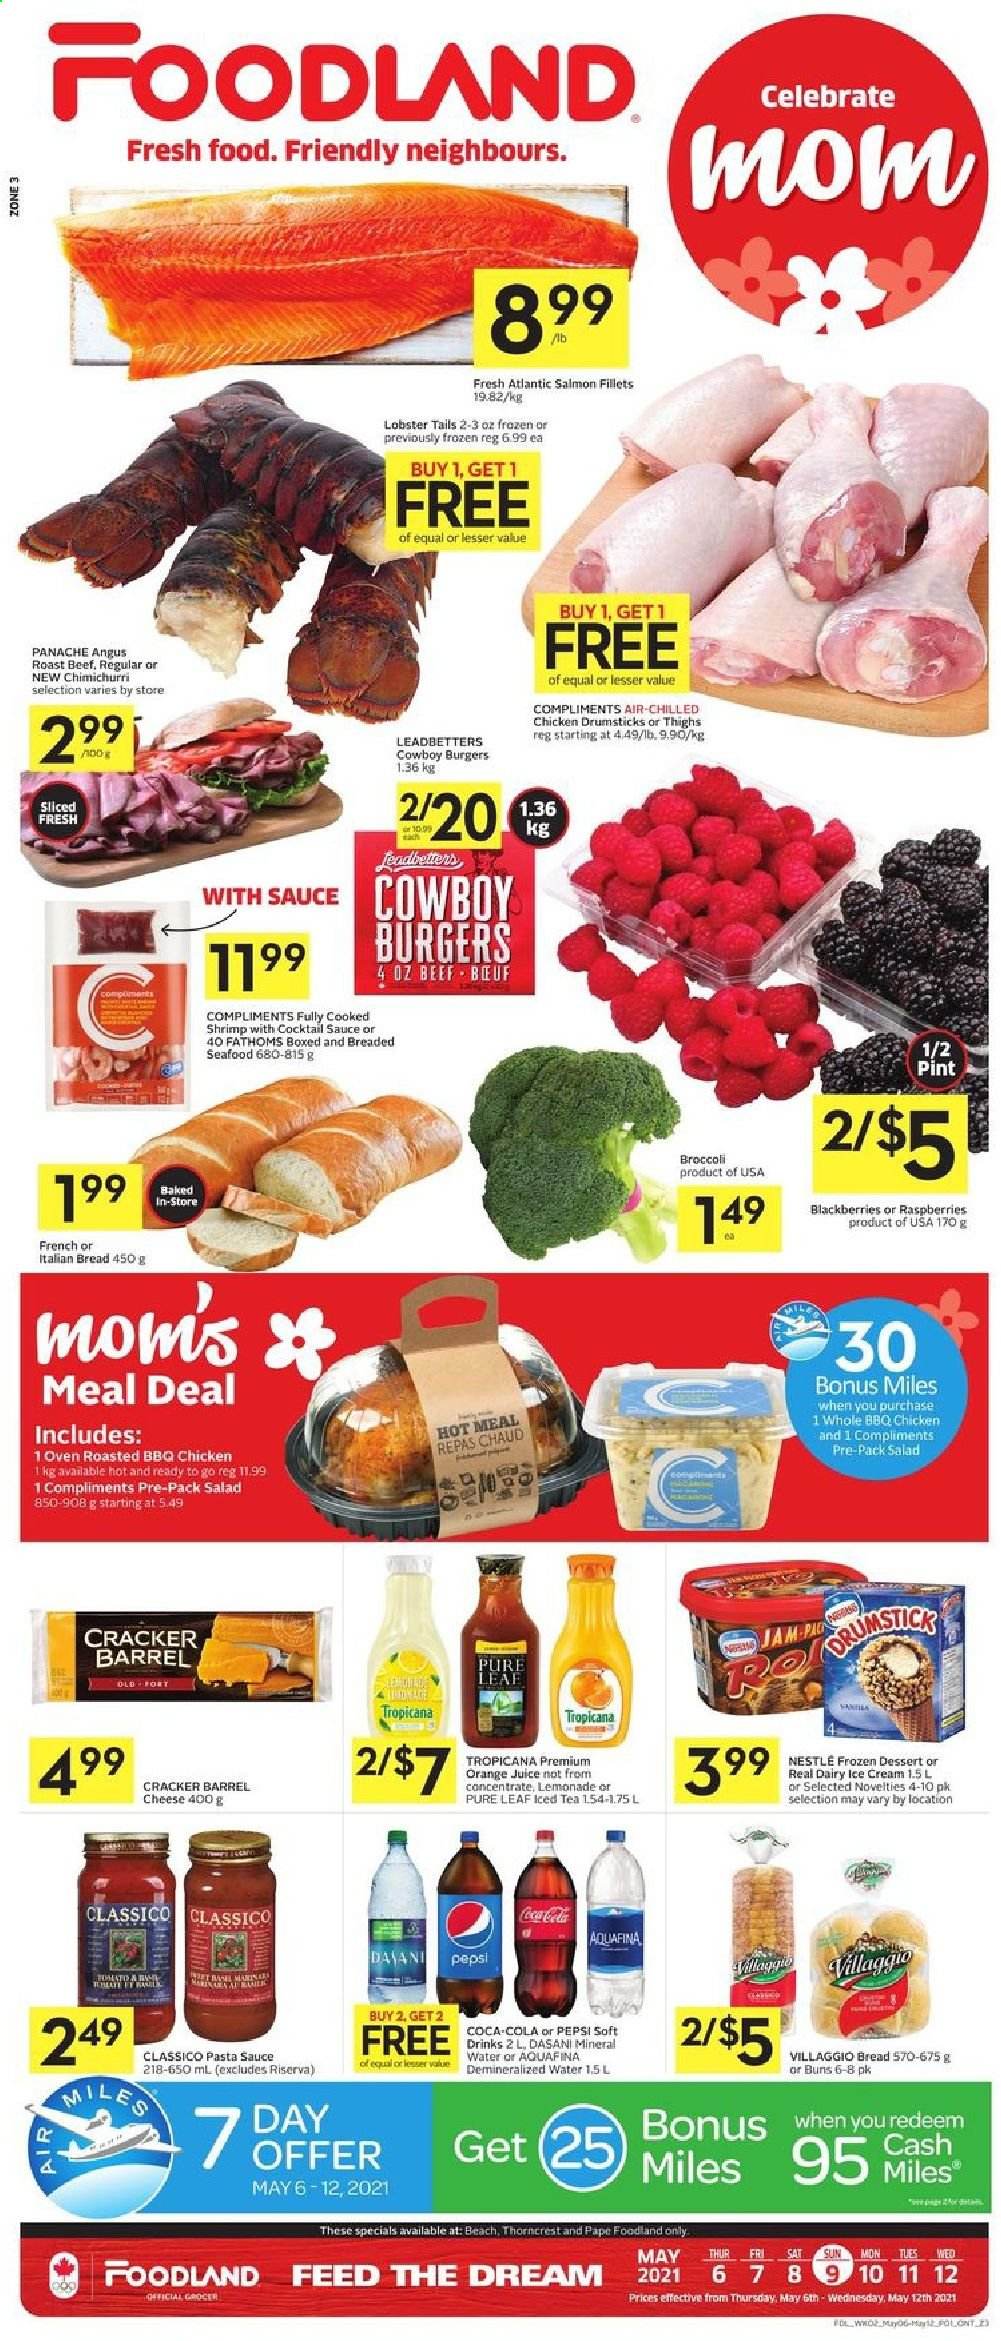 thumbnail - Foodland Flyer - May 06, 2021 - May 12, 2021 - Sales products - bread, salad, blackberries, lobster, salmon, salmon fillet, seafood, lobster tail, shrimps, pasta sauce, hamburger, cheese, ice cream, crackers, cocktail sauce, Classico, fruit jam, Coca-Cola, lemonade, Pepsi, orange juice, juice, ice tea, soft drink, Aquafina, mineral water, Pure Leaf, chicken drumsticks, chicken, beef meat, roast beef, Nestlé. Page 1.